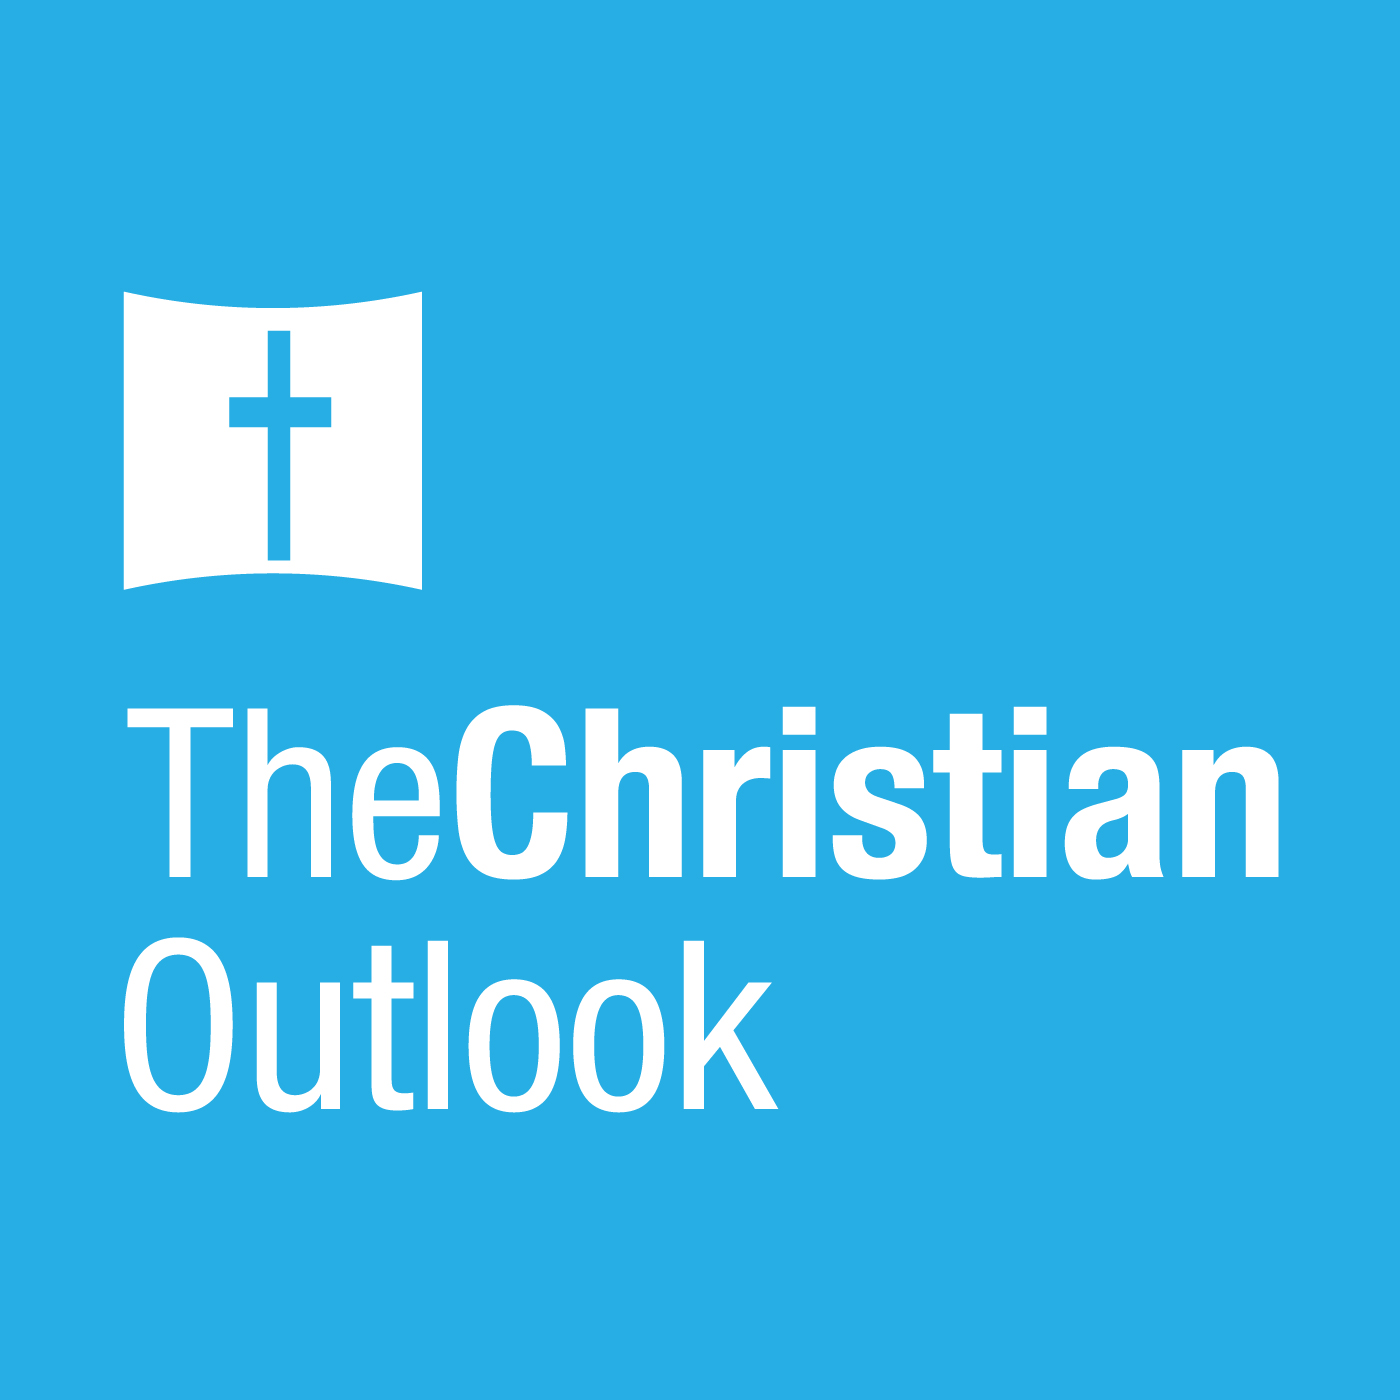 TCO 3/4/17: Defending Christian Truth in the Post-Modern Era